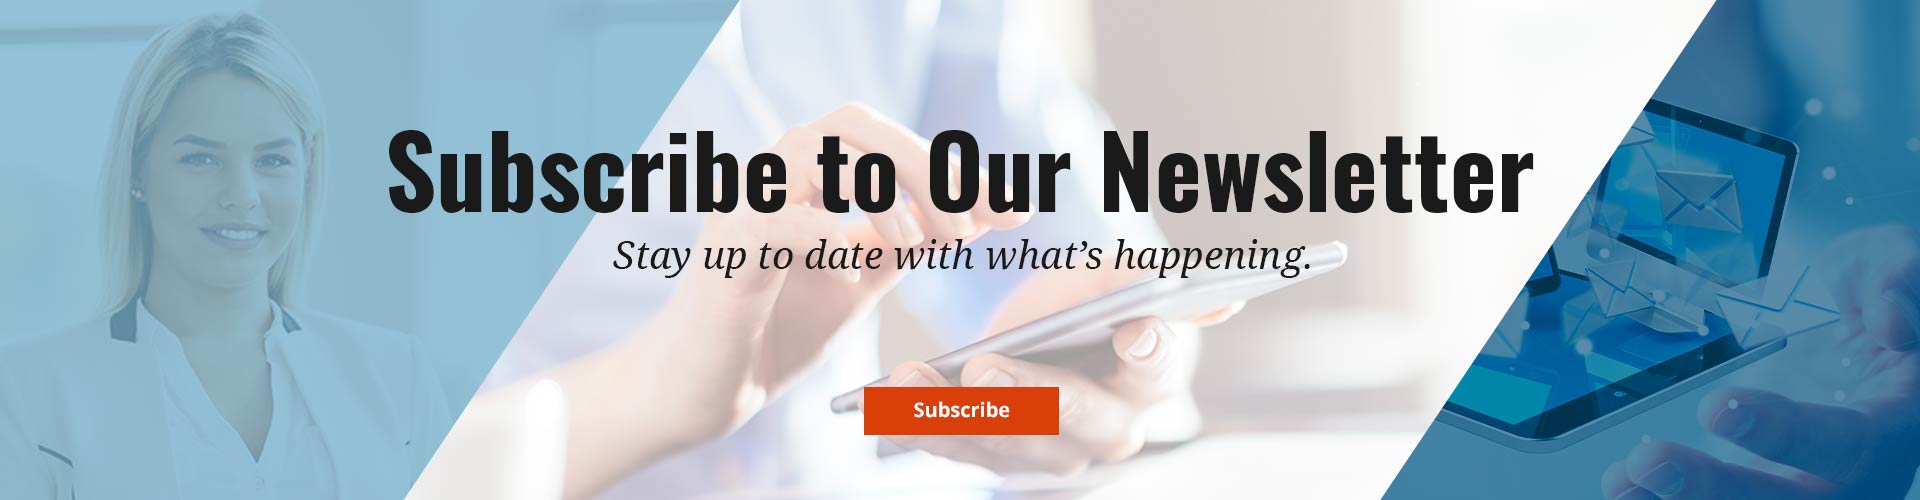 Subscribe to our Newsletter Banner